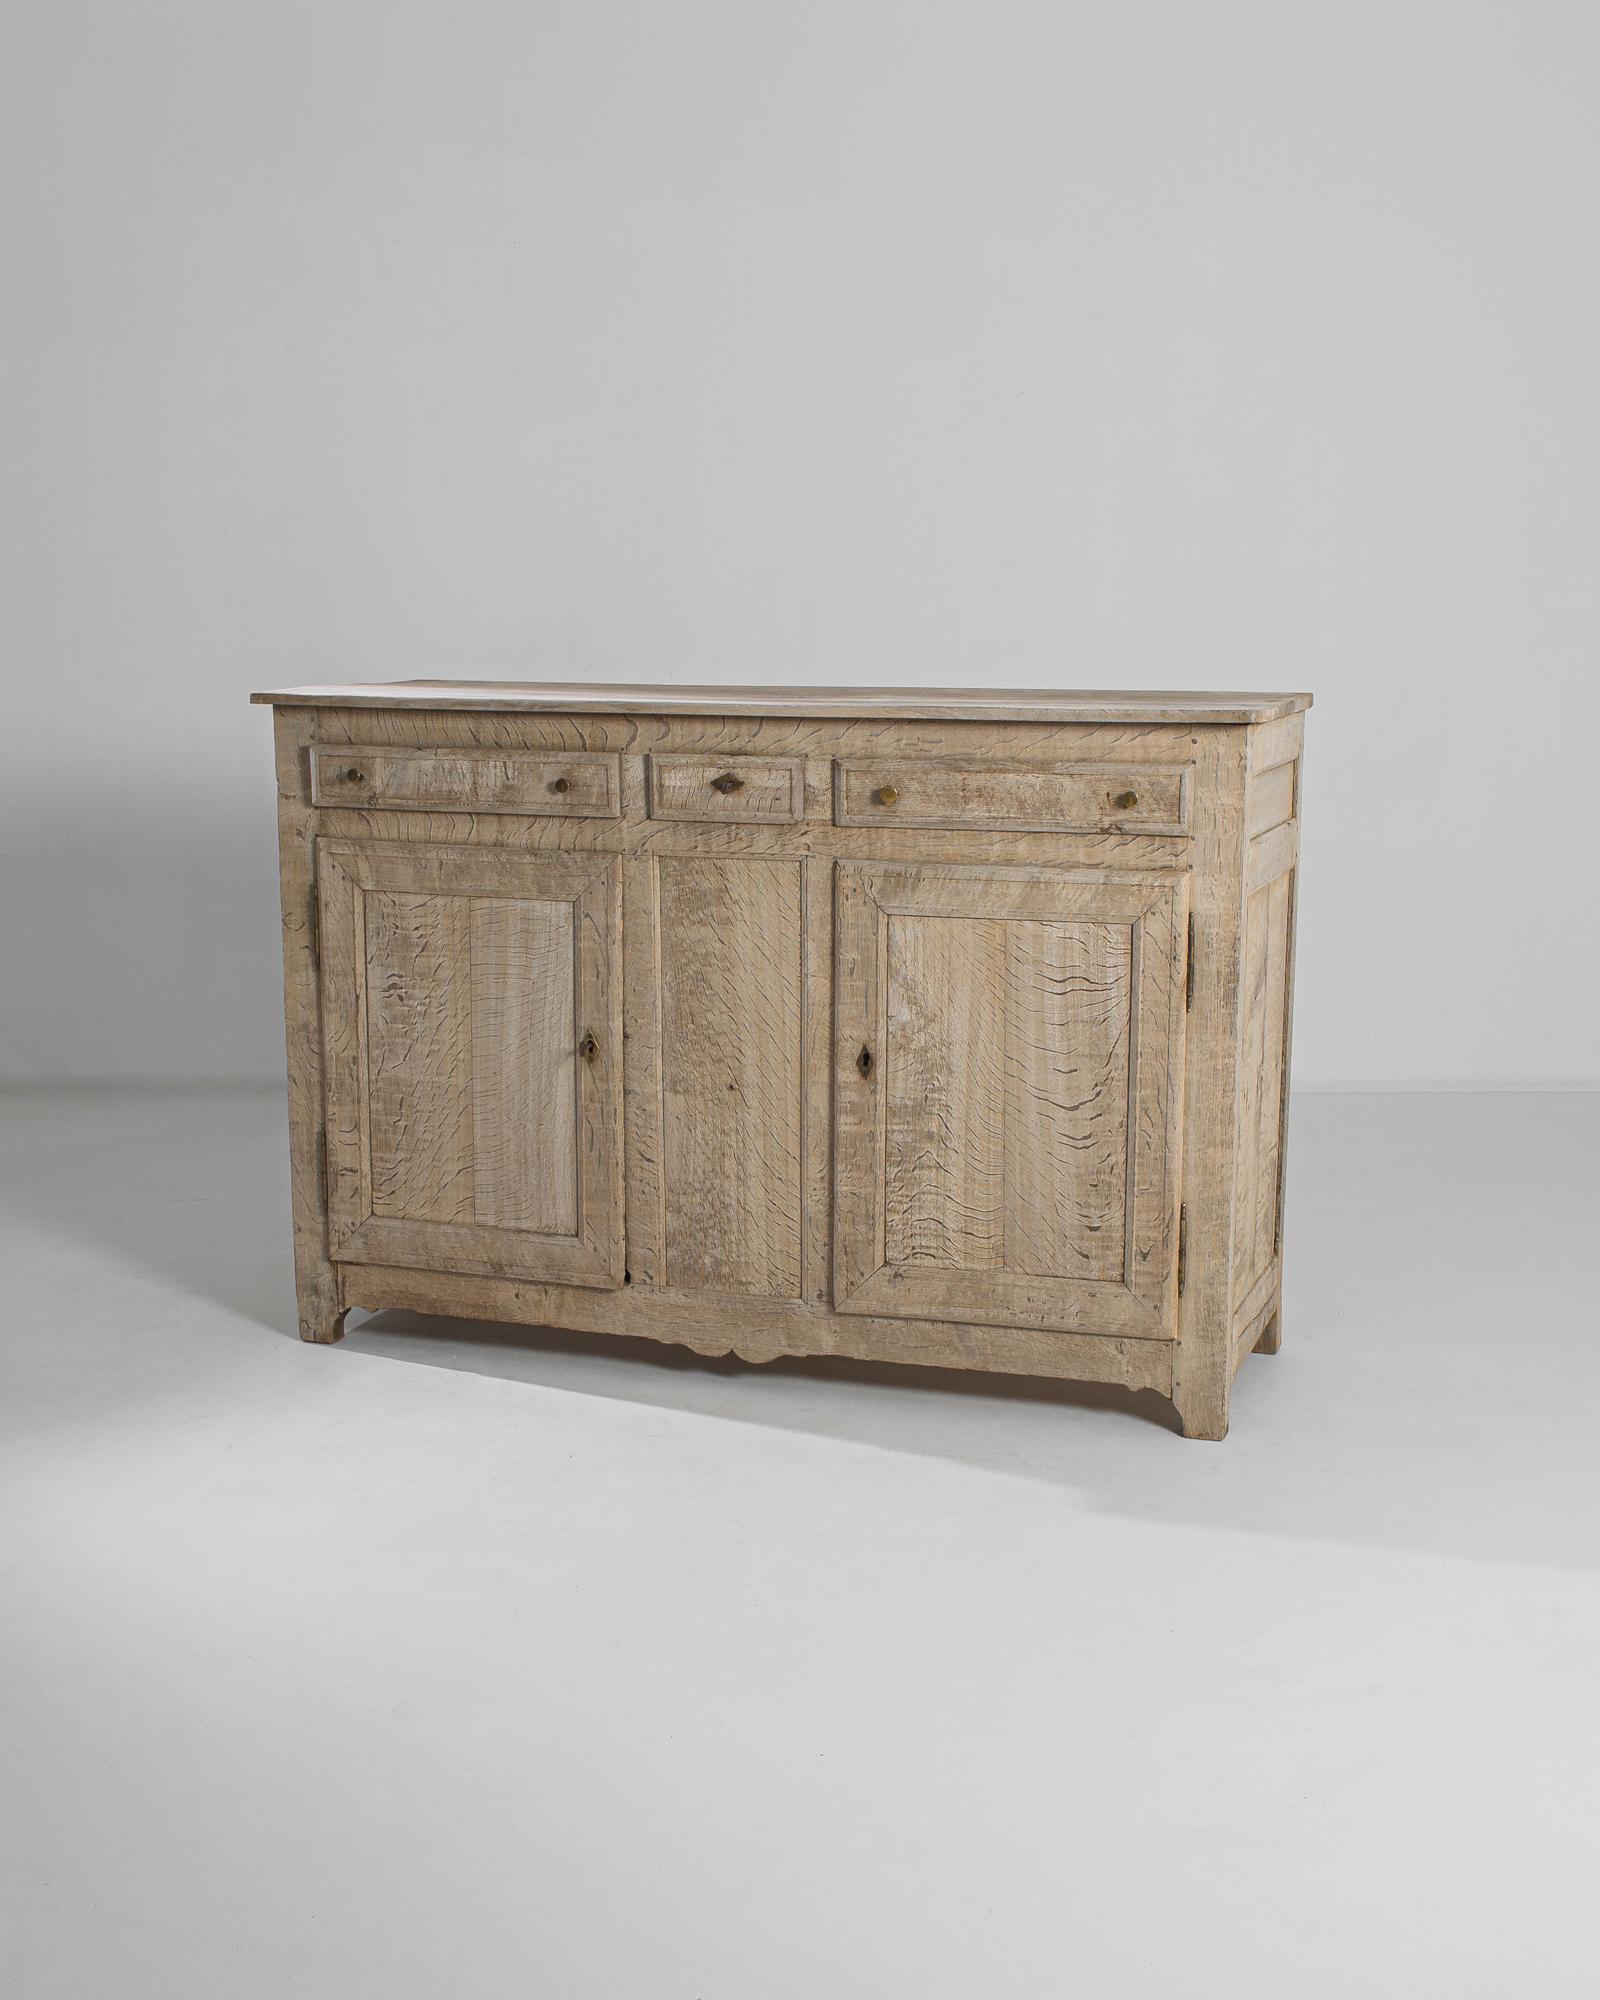 This bleached oak buffet was made in France, circa 1820. The clean design is marked by discreet ornamentation, allowing its pleasing rustic tone and exquisite wood grain to take center stage. Geometric brass pulls and lockplates, combined with the